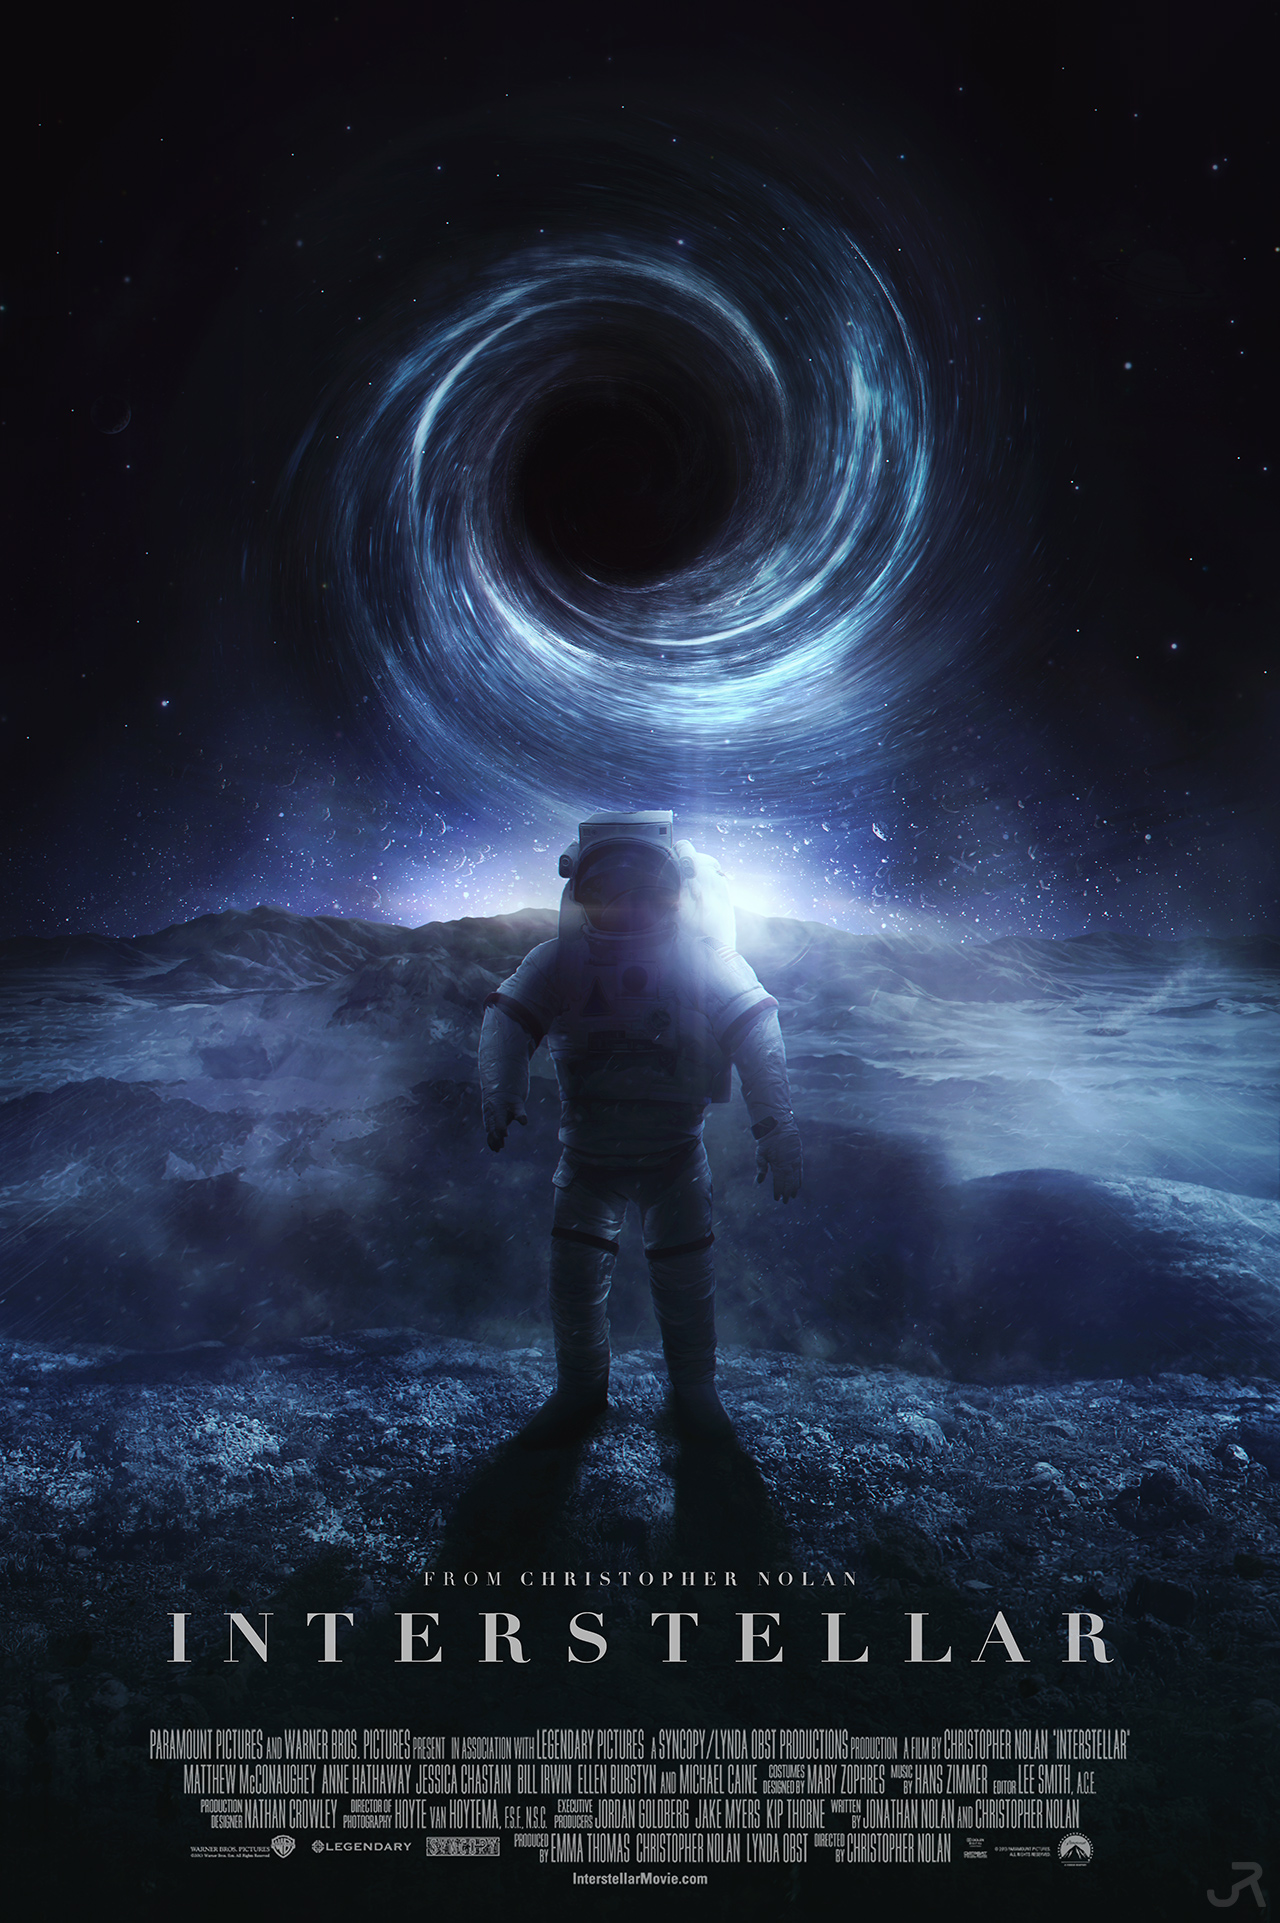 Interstellar Movie Review - Stance: Studies on the Family